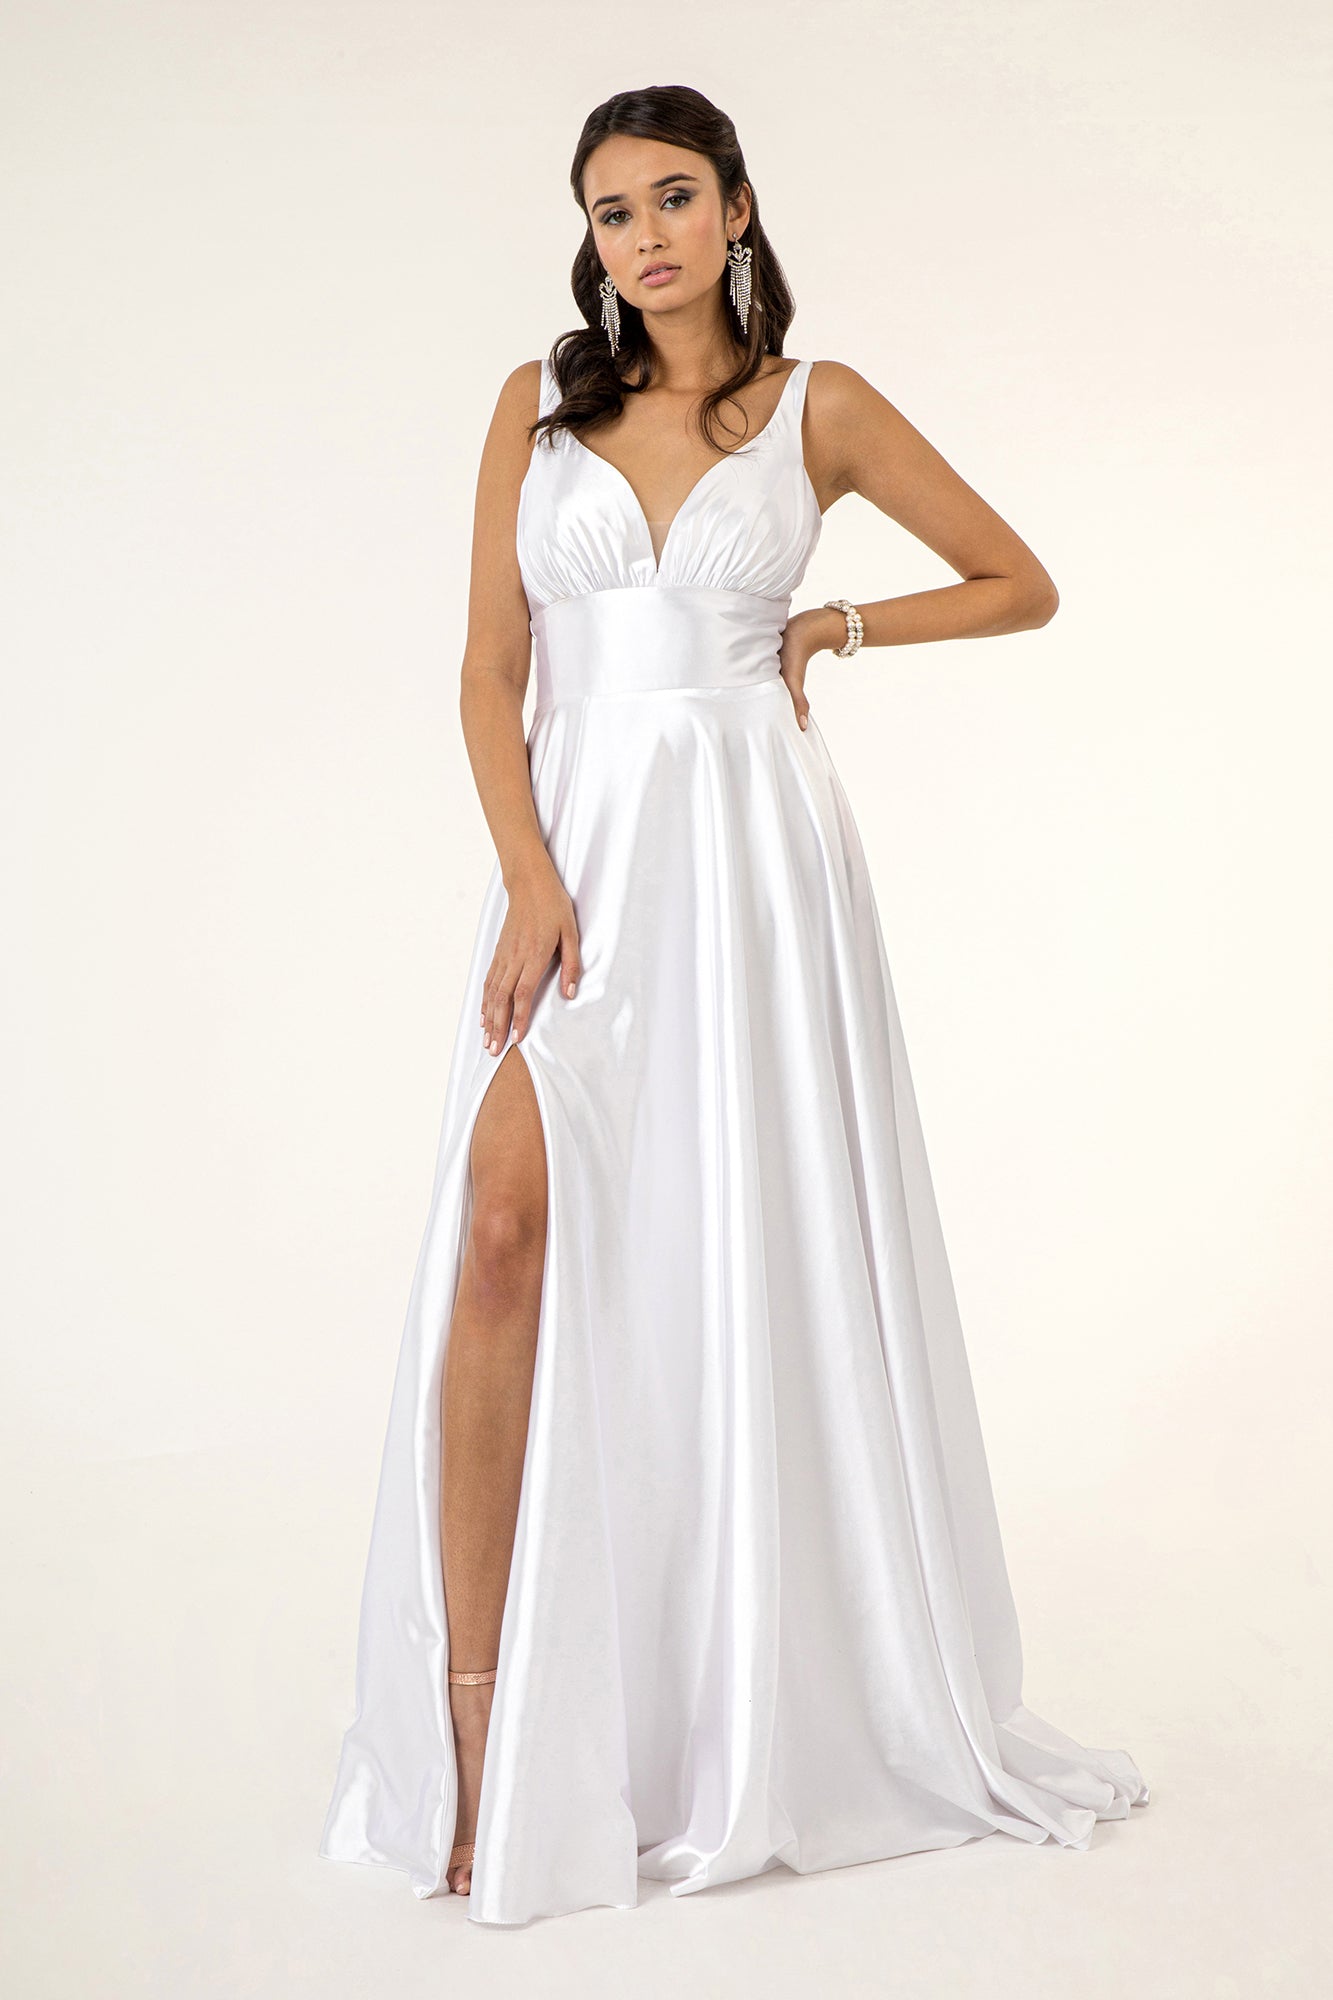 GLS COLLECTIVE - GL2963 - Blue L Long Prom / Bridesmaid Dress or White XL Wedding Dress